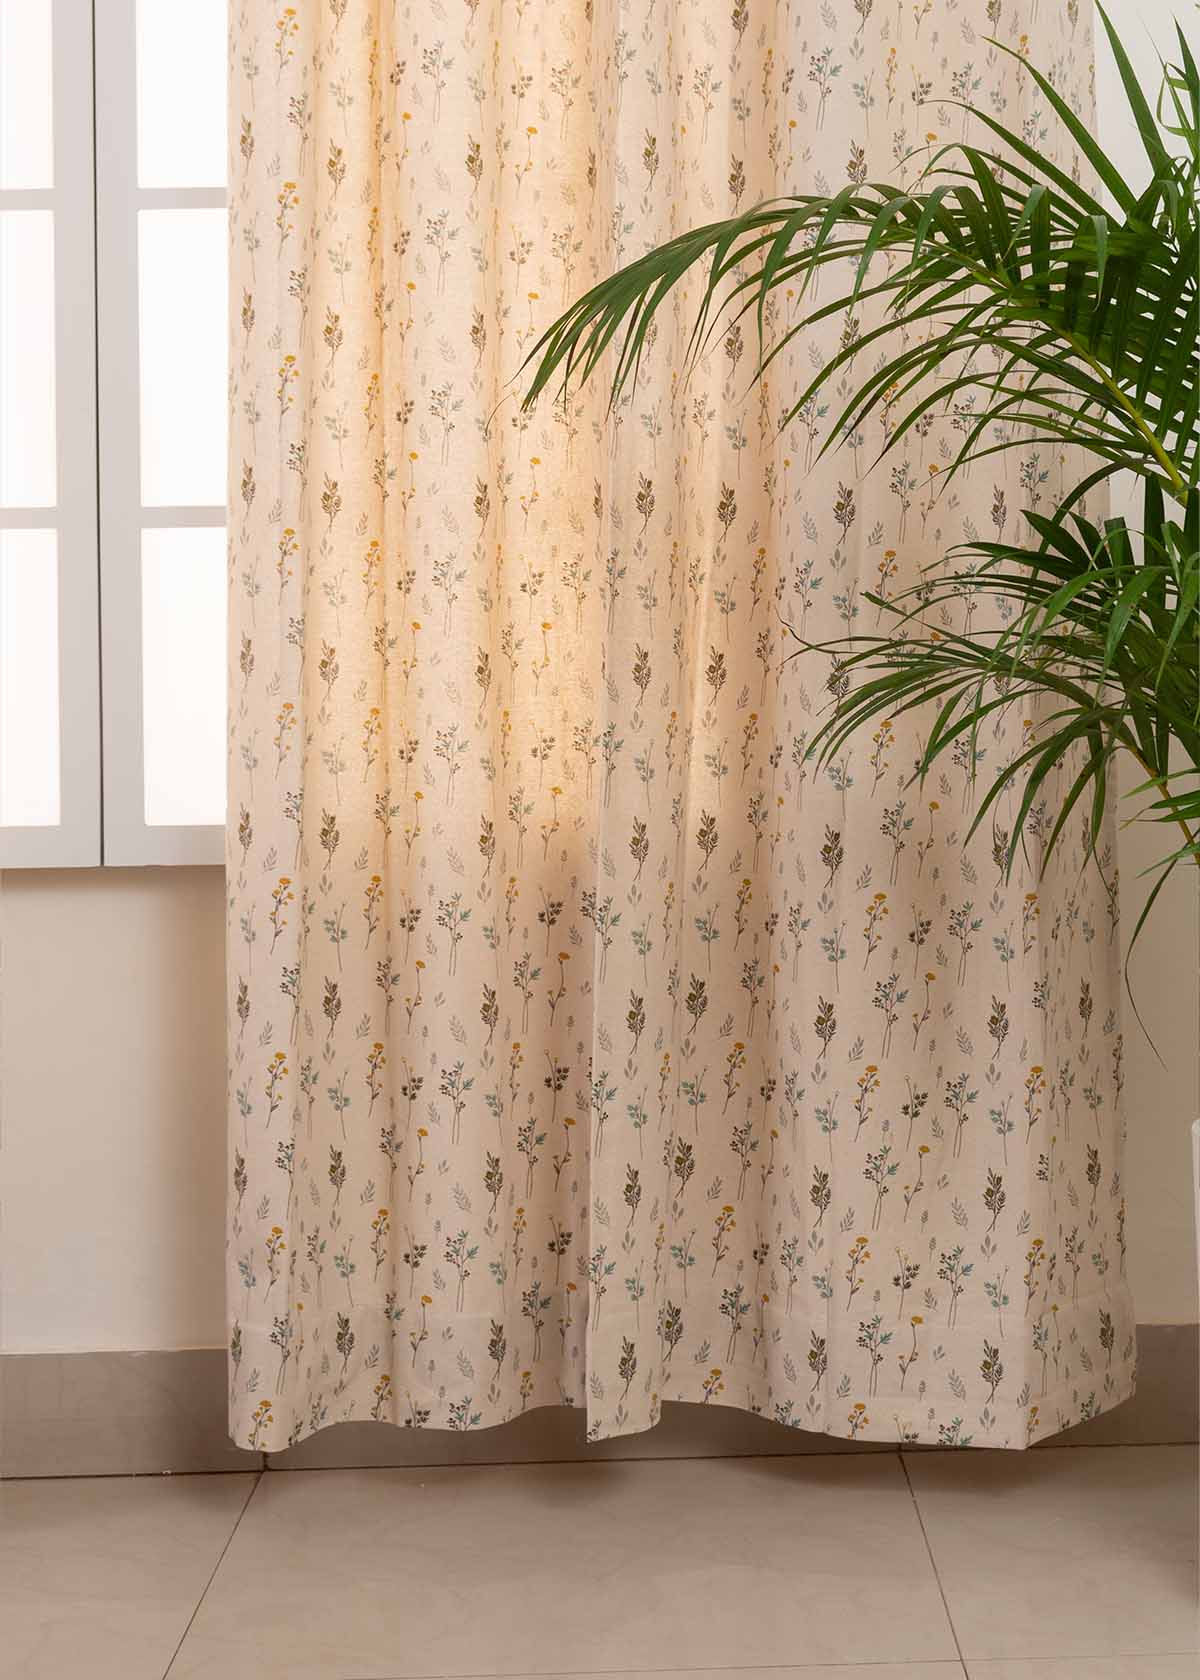 Blooming Meadows 100% cotton floral curtain for living room - Room darkening - Beige - Pack of 1